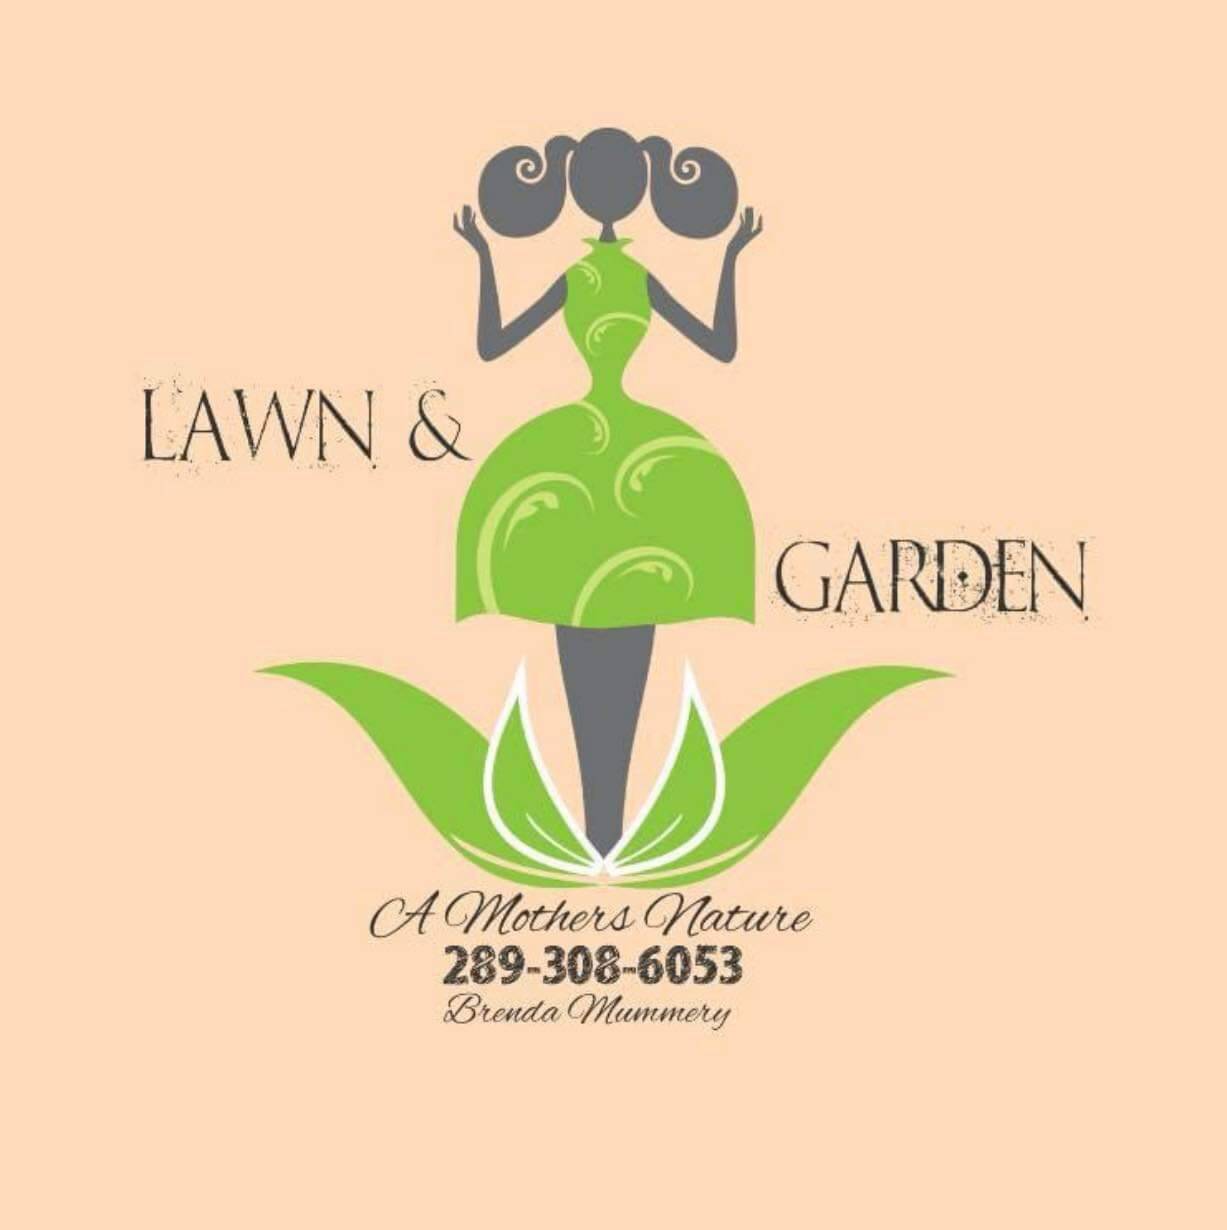  A Mothers Nature-Lawn & Garden